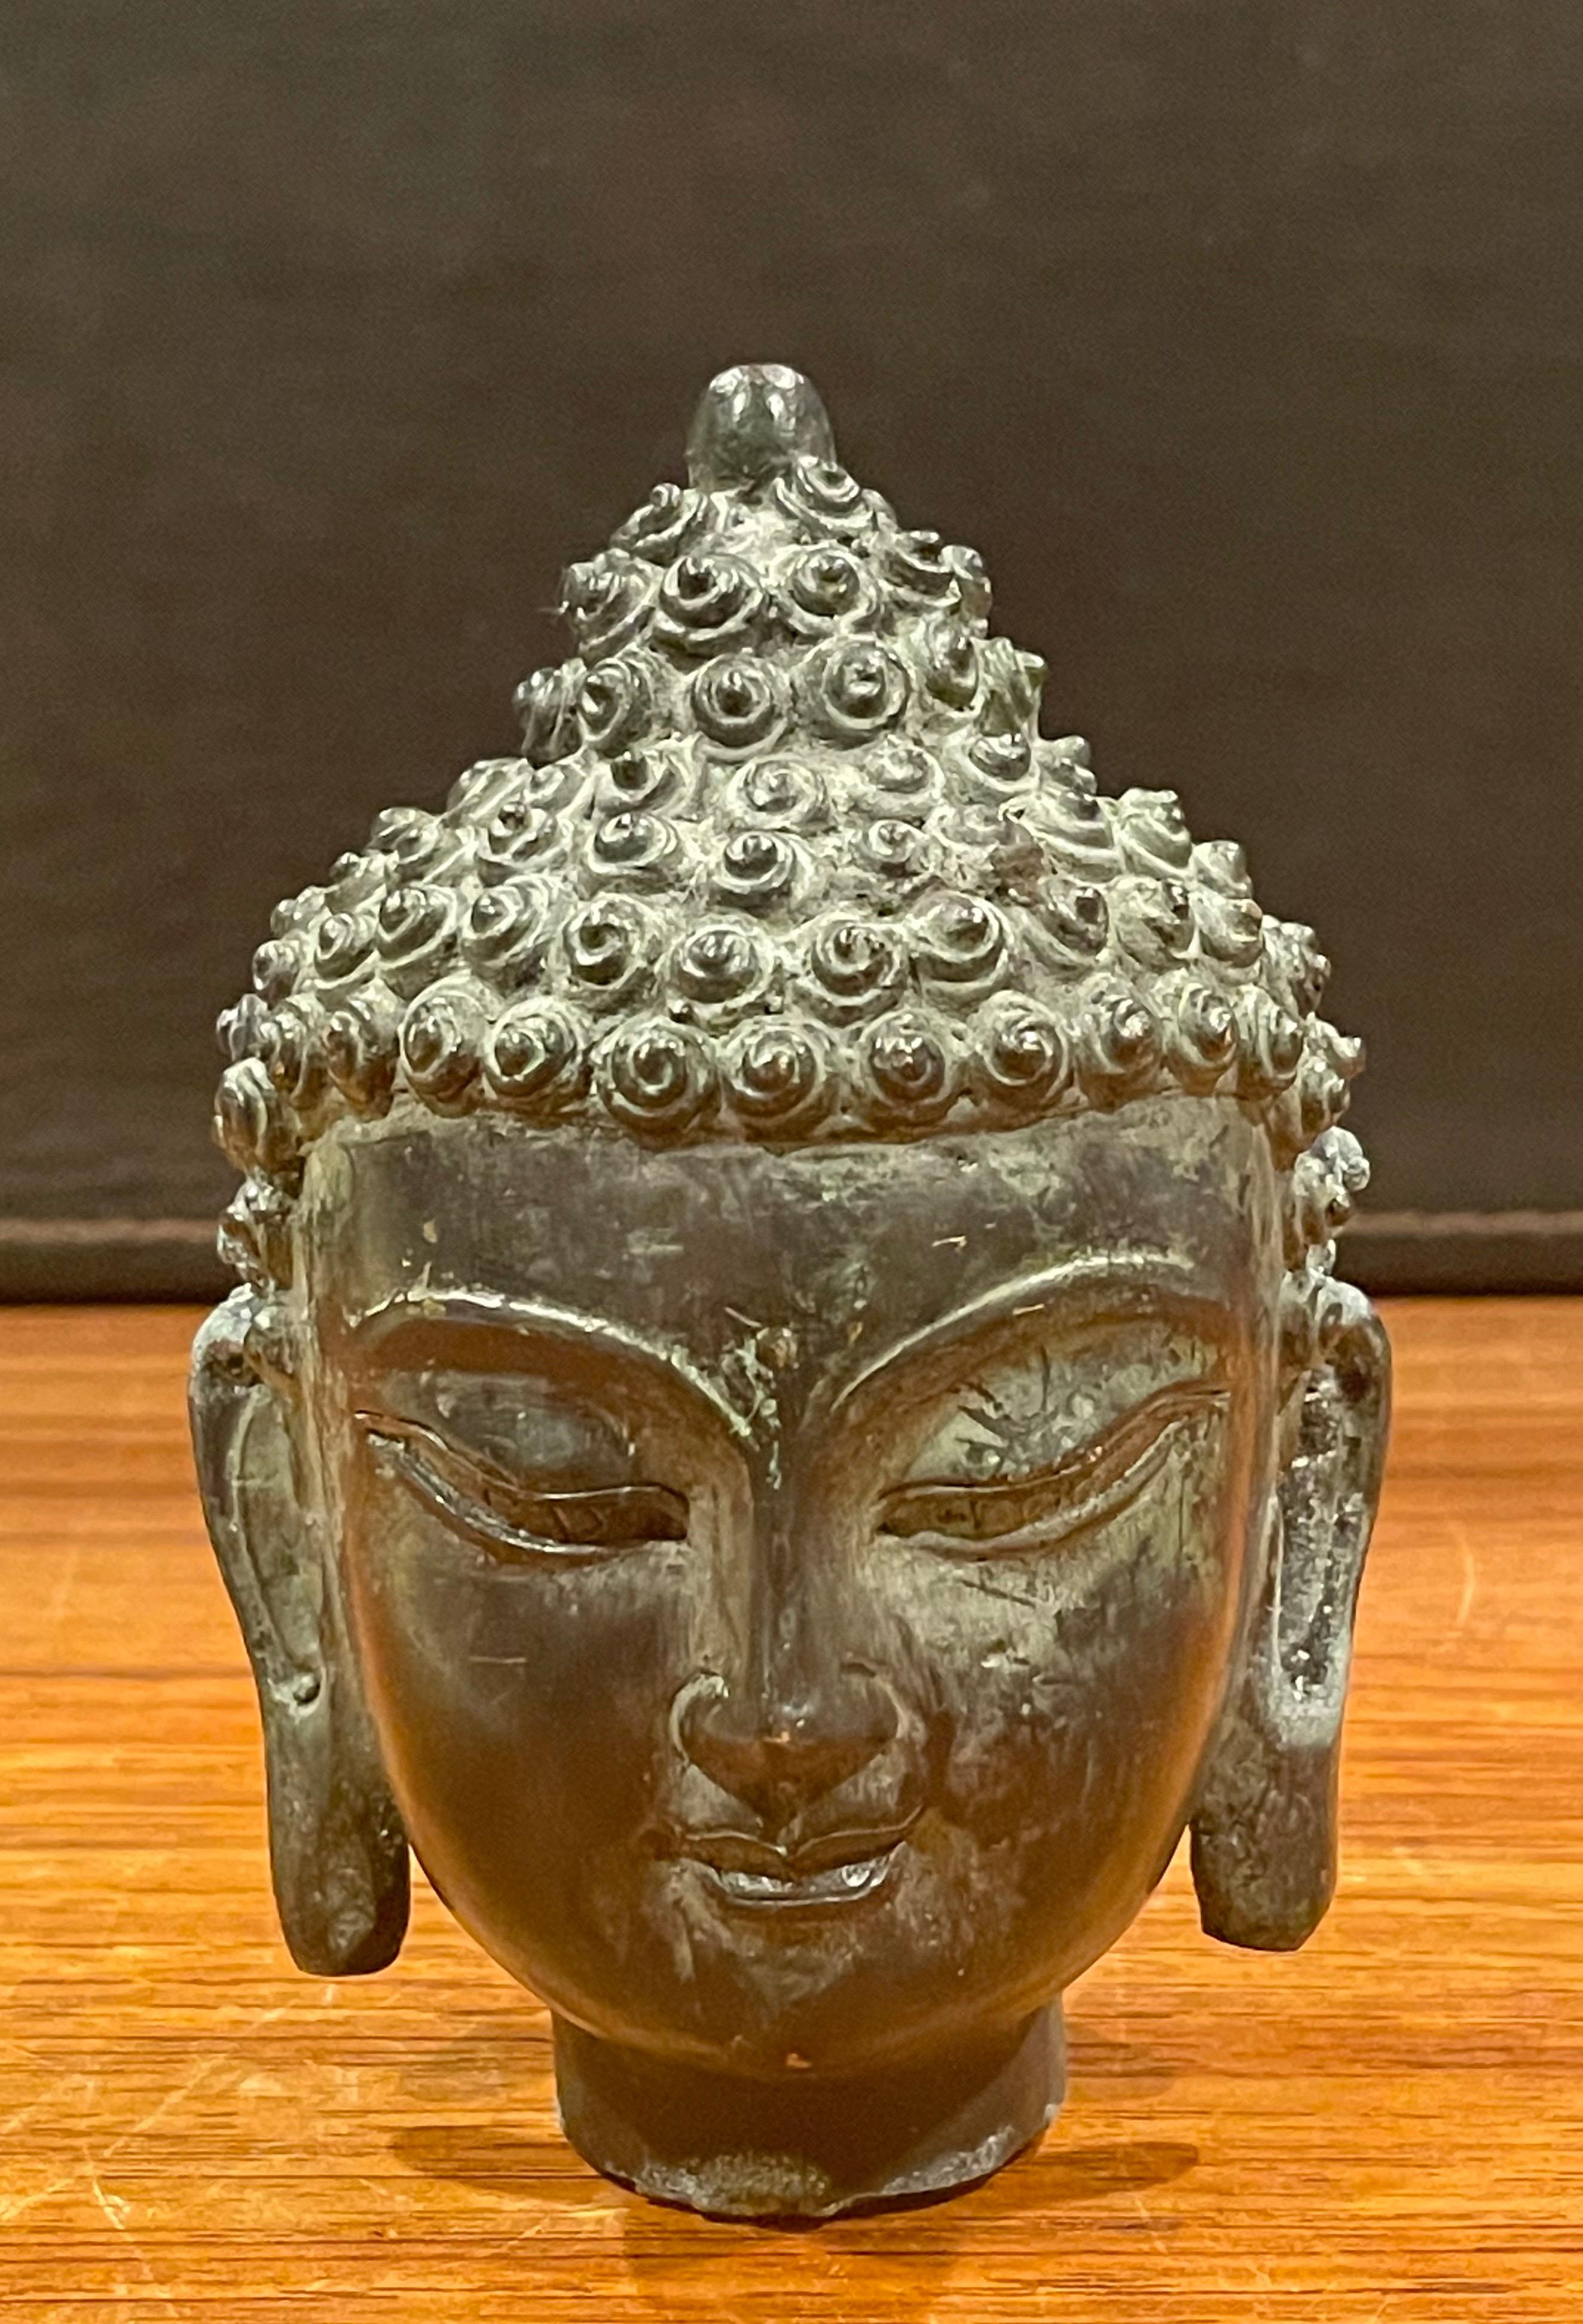 Small decorative cast bronze Buddha head, circa 1970s. The piece is in very good vintage condition and measures: 3.5